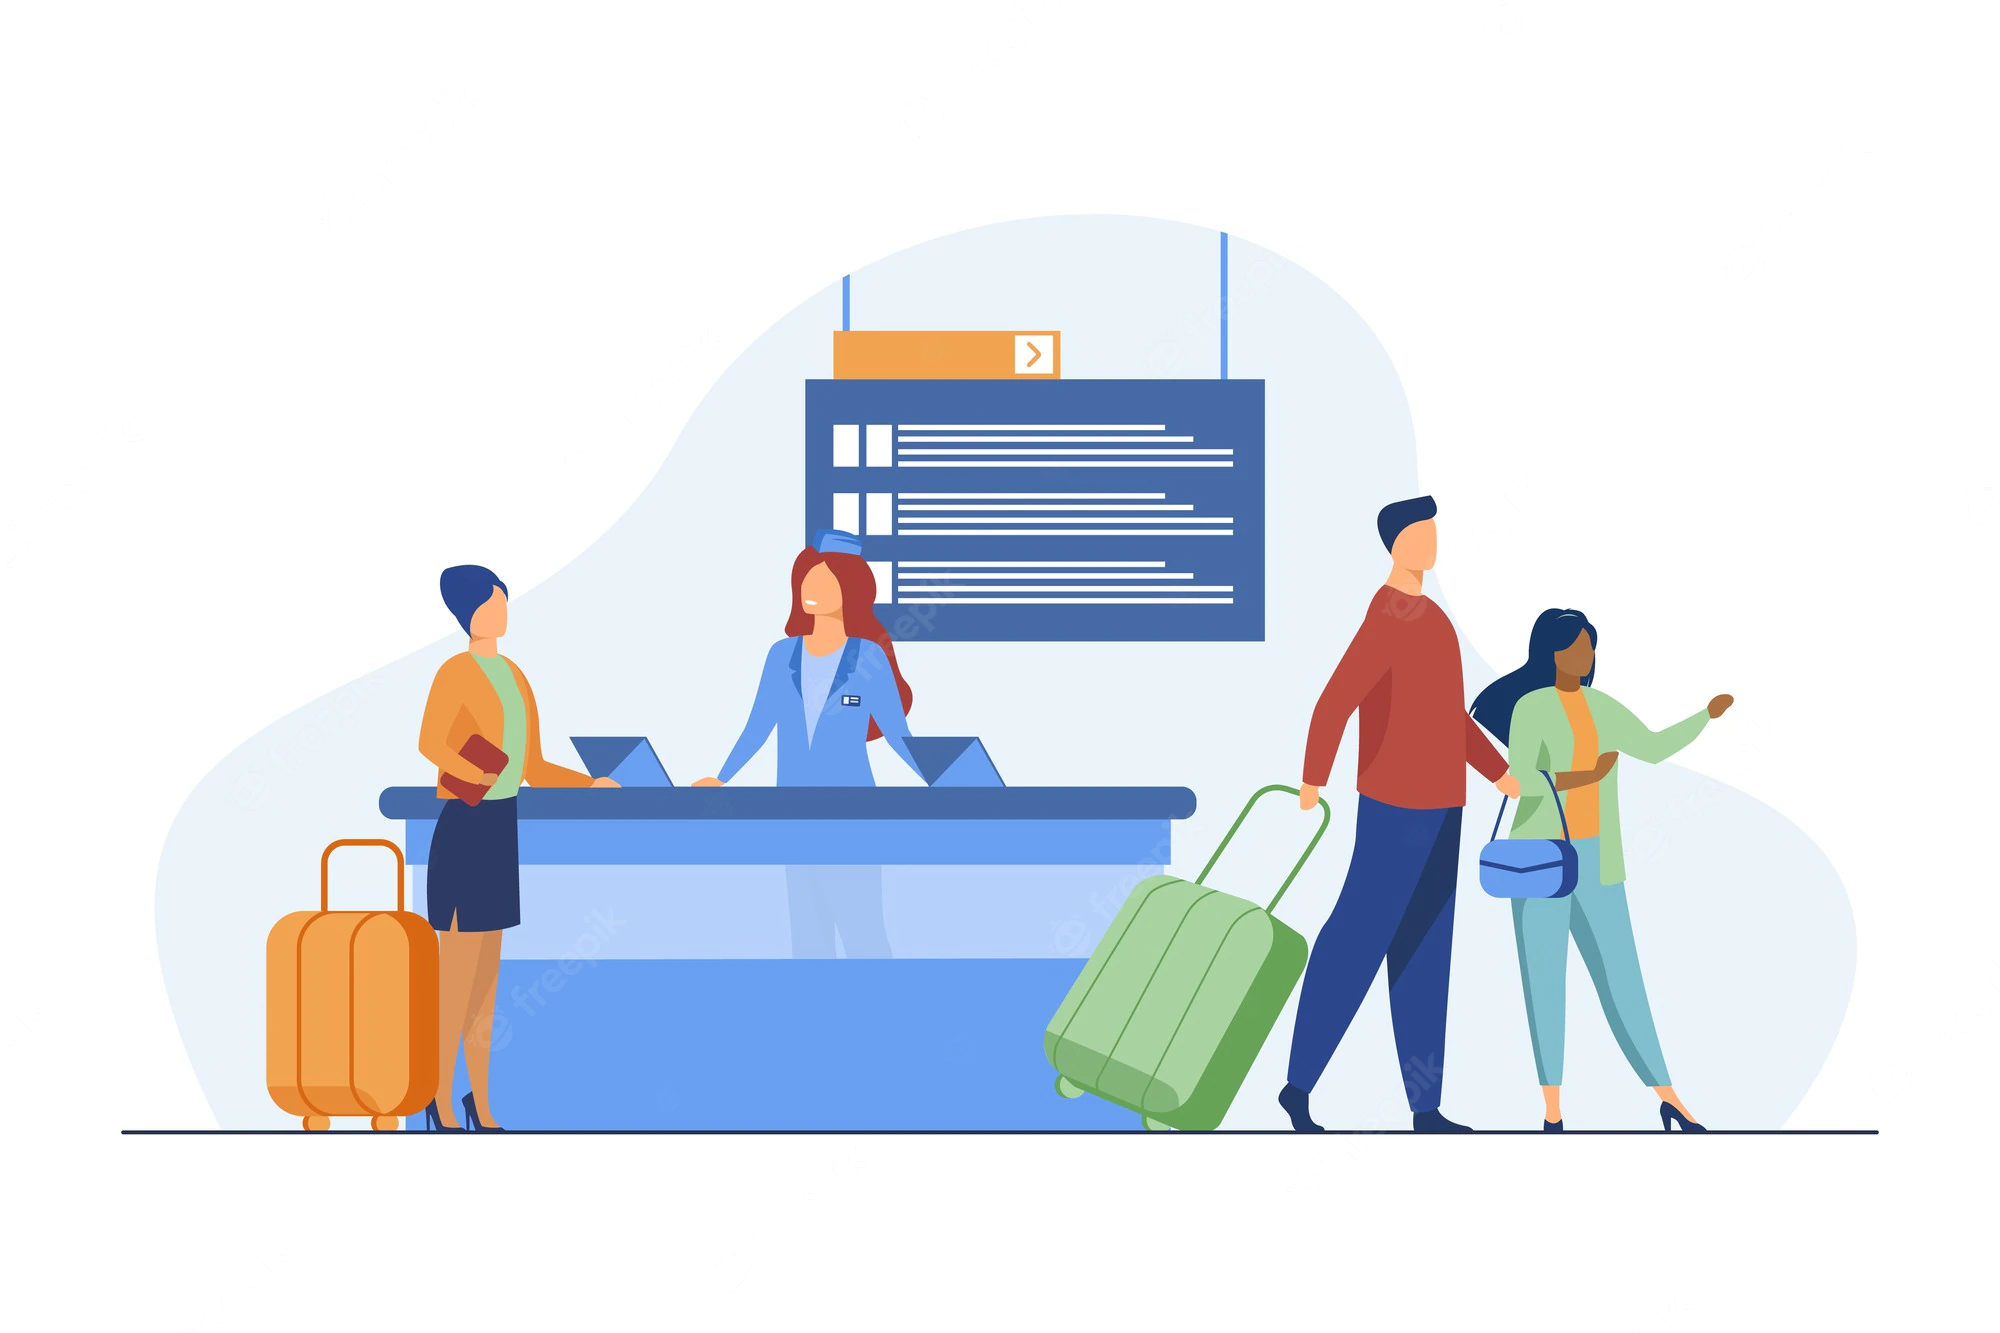 happy-travelers-going-through-flight-registration-counter-trip-baggage-luggage-flat-vector-illustration-travel-vacation_74855-8405